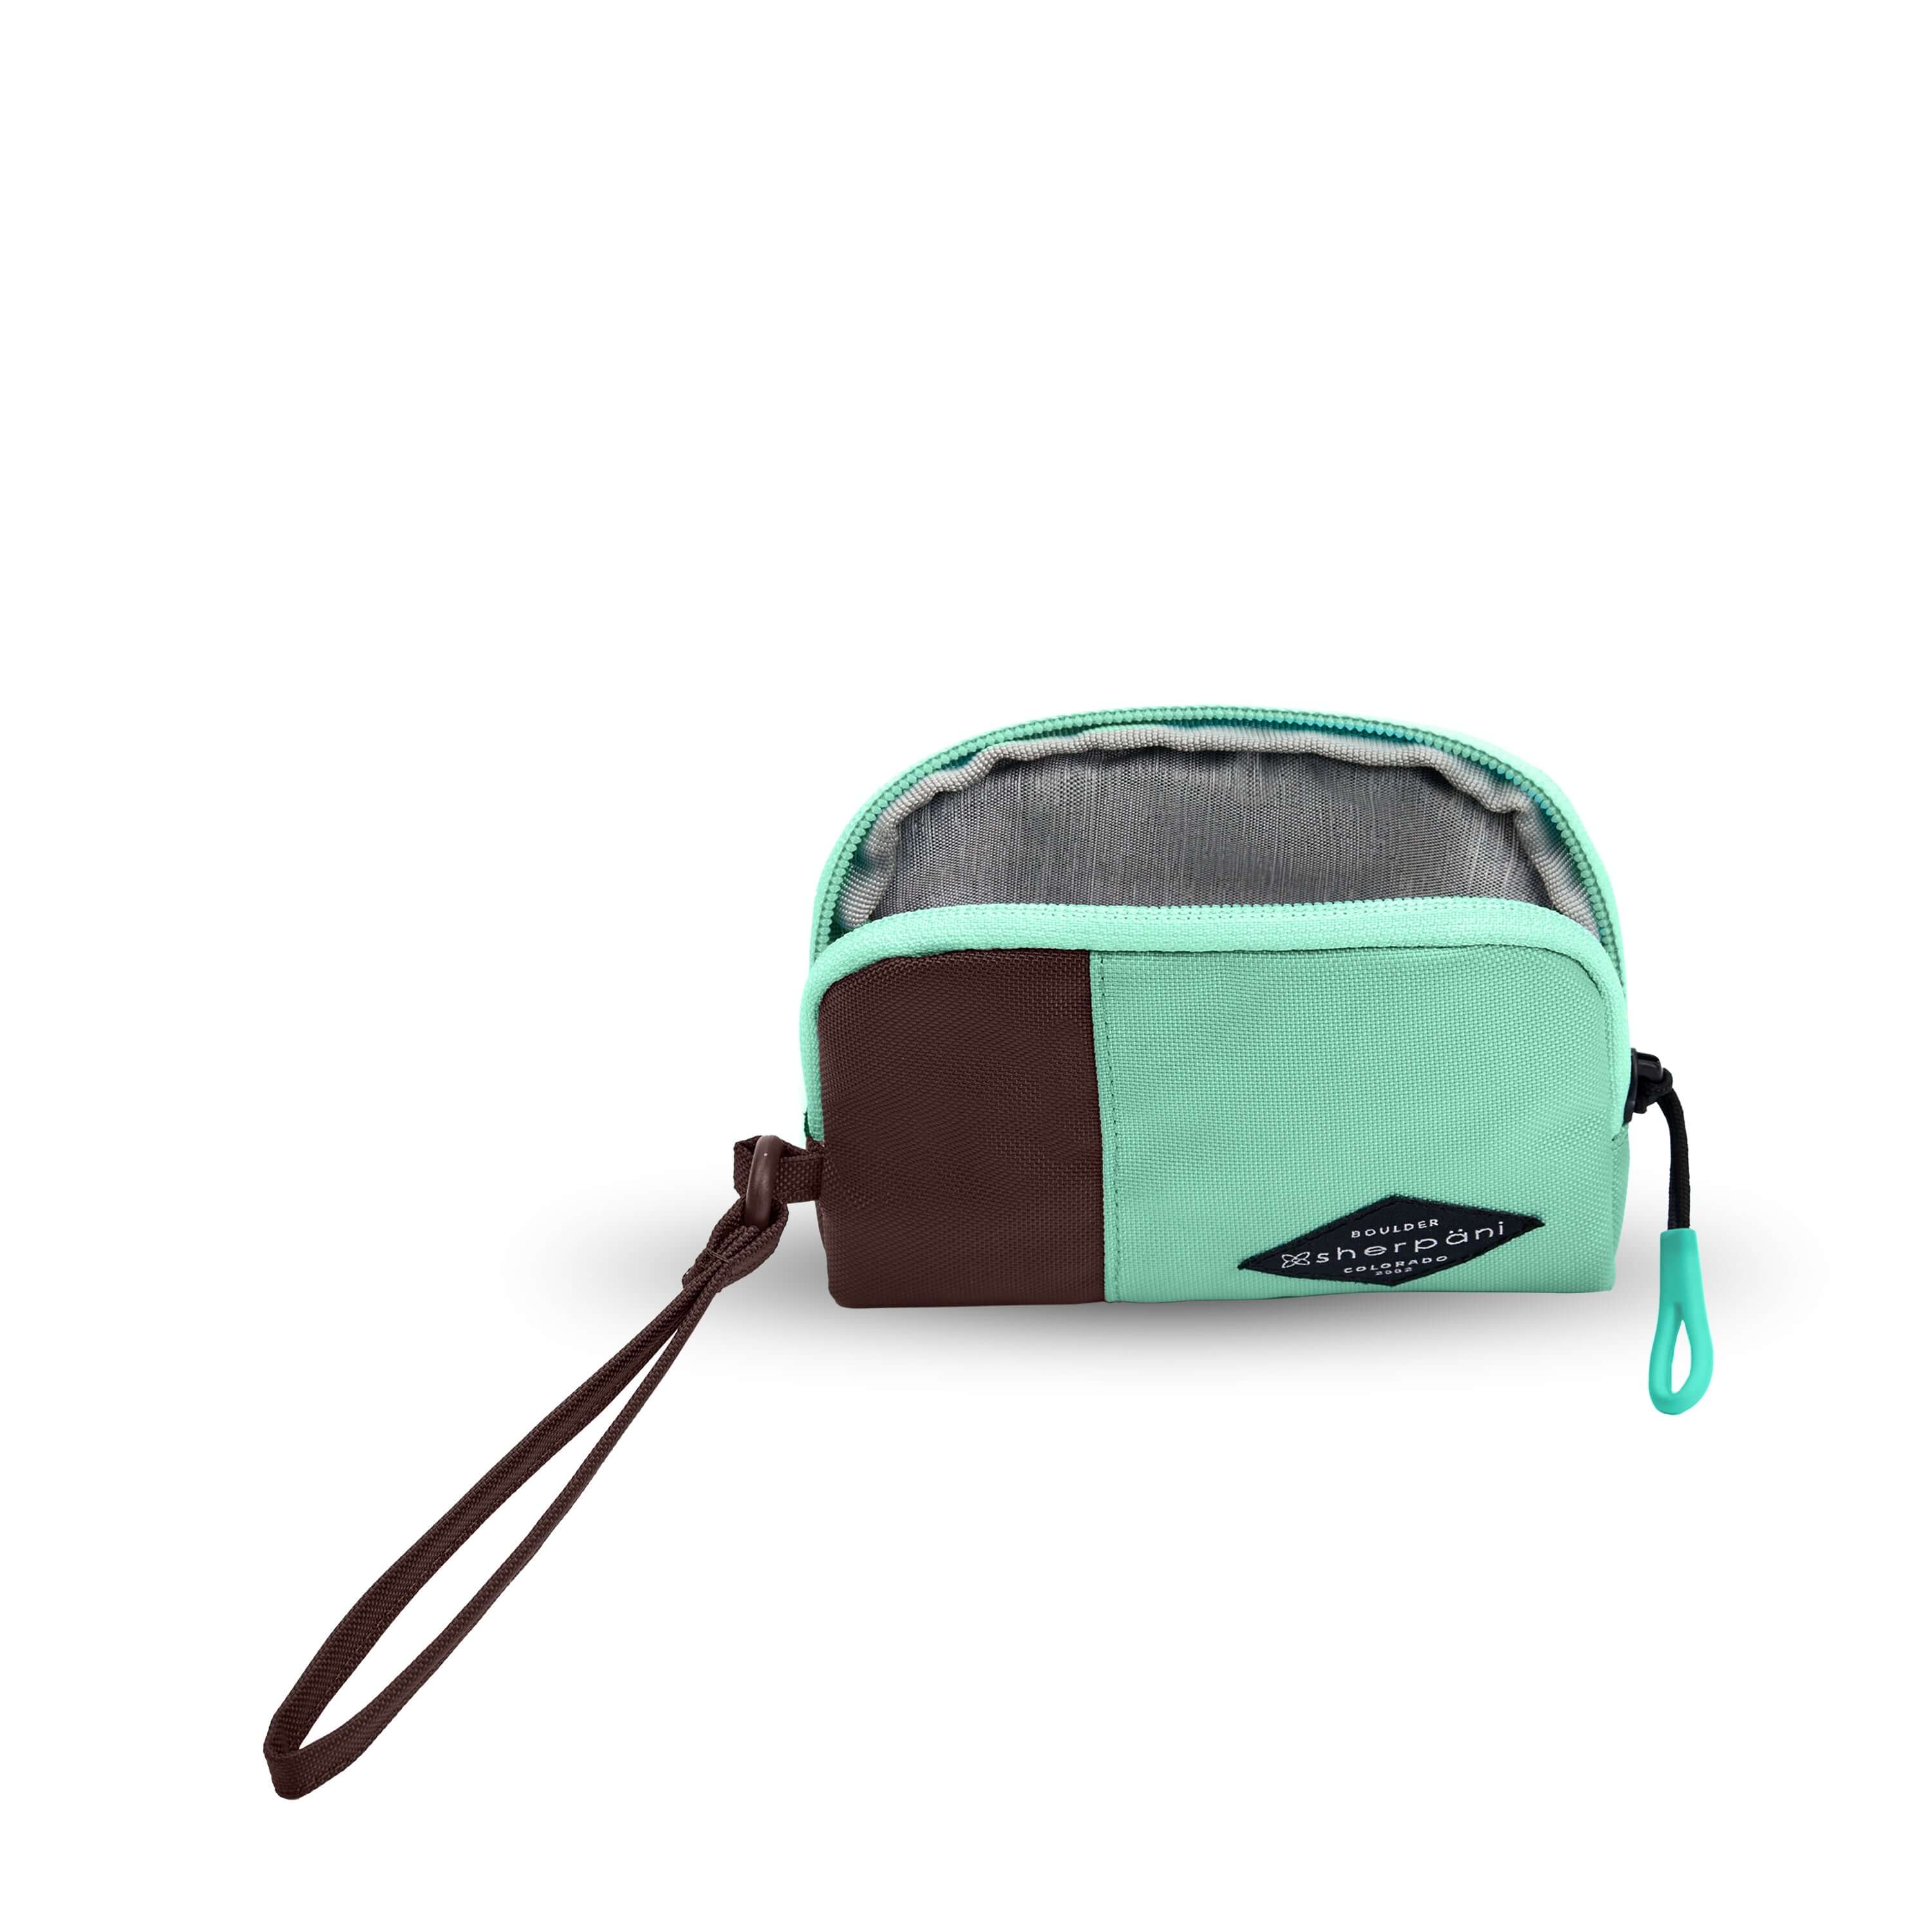 Top view of Sherpani travel accessory the Jolie in Seagreen, in small size. The pouch is unzipped to reveal a light gray interior.